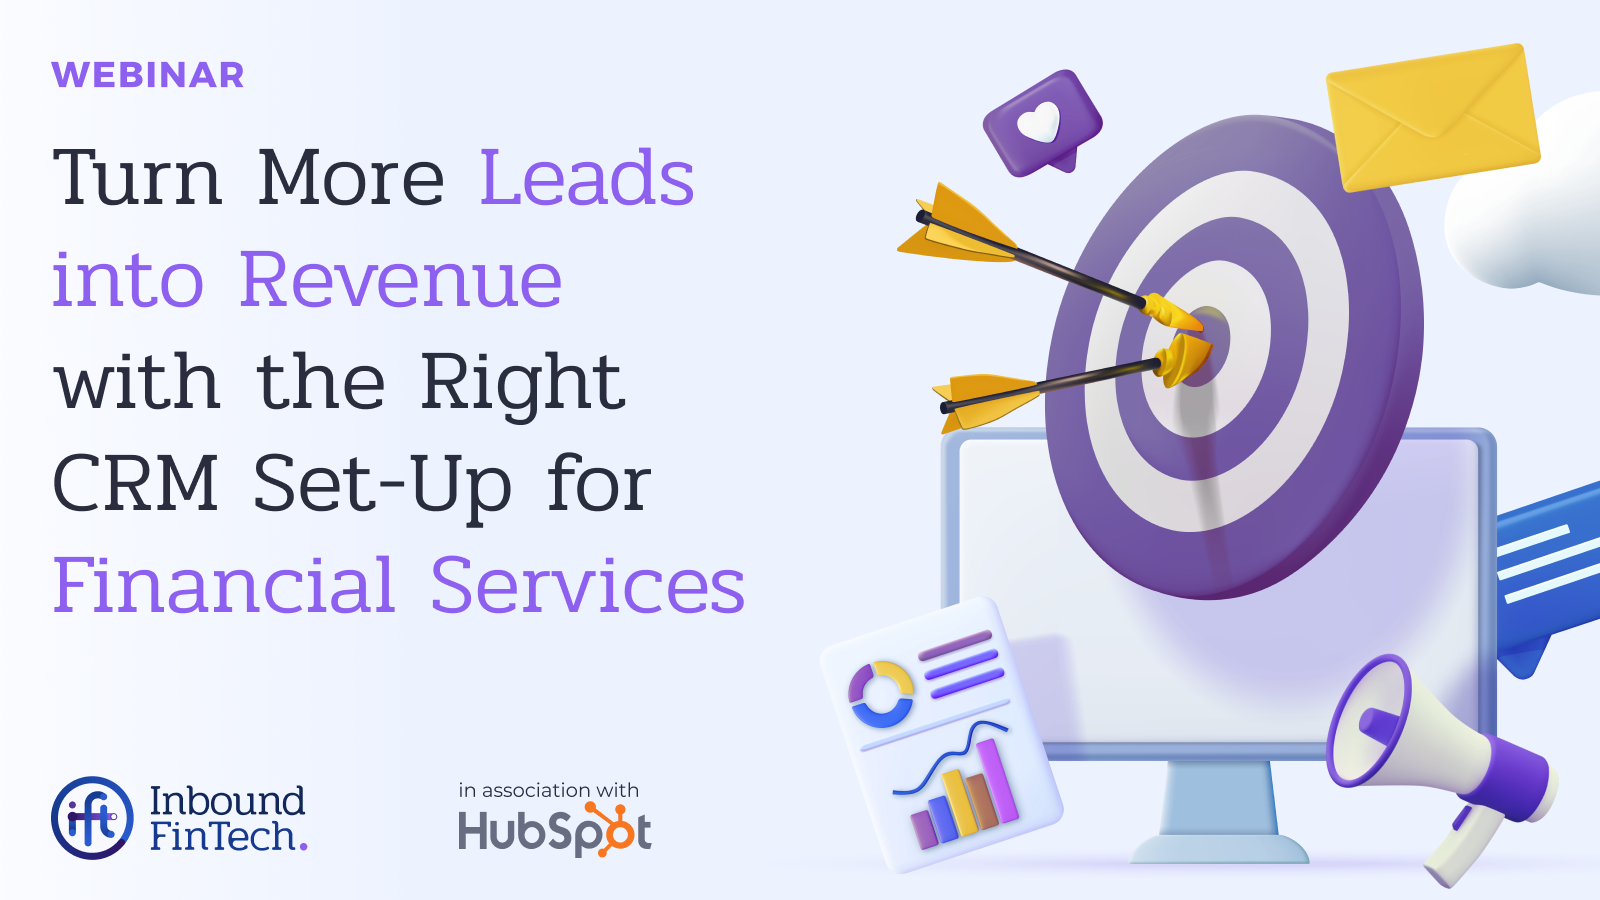 How the right CRM set-up for Financial Services can turn more leads into revenue | Webinar